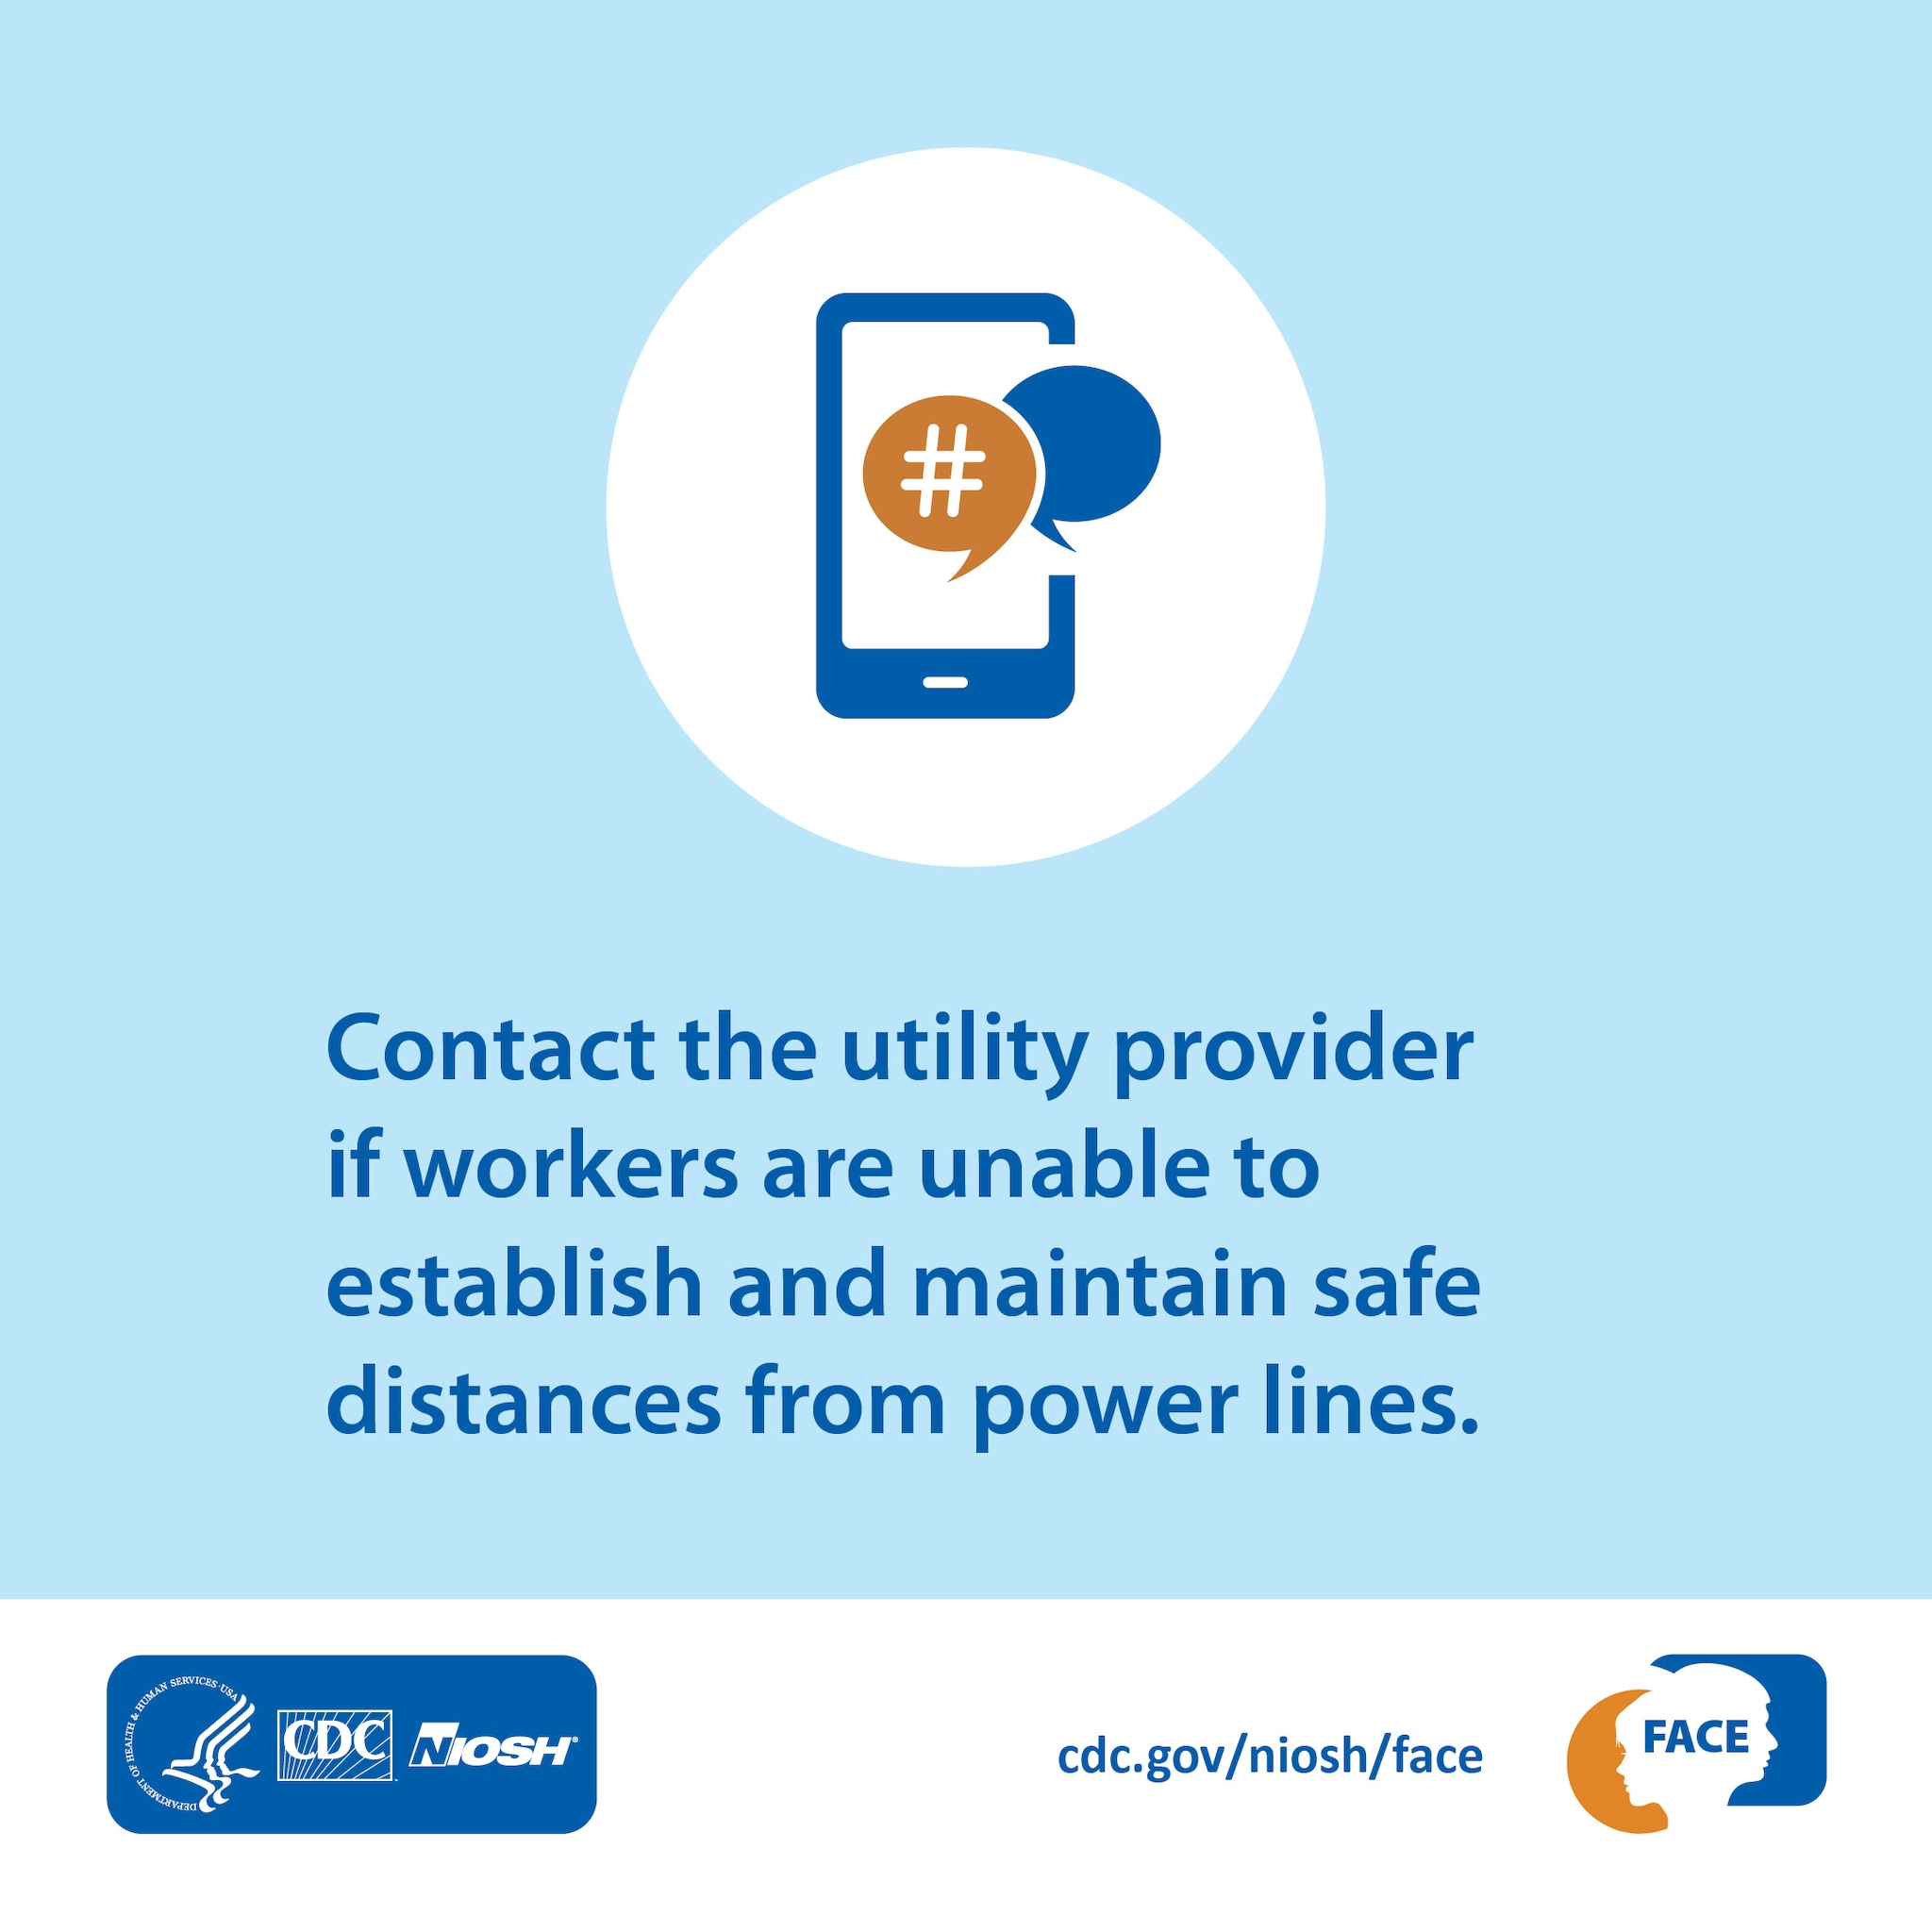 Contact the utility provider if workers are unable to establish and maintain safe distances from power lines.